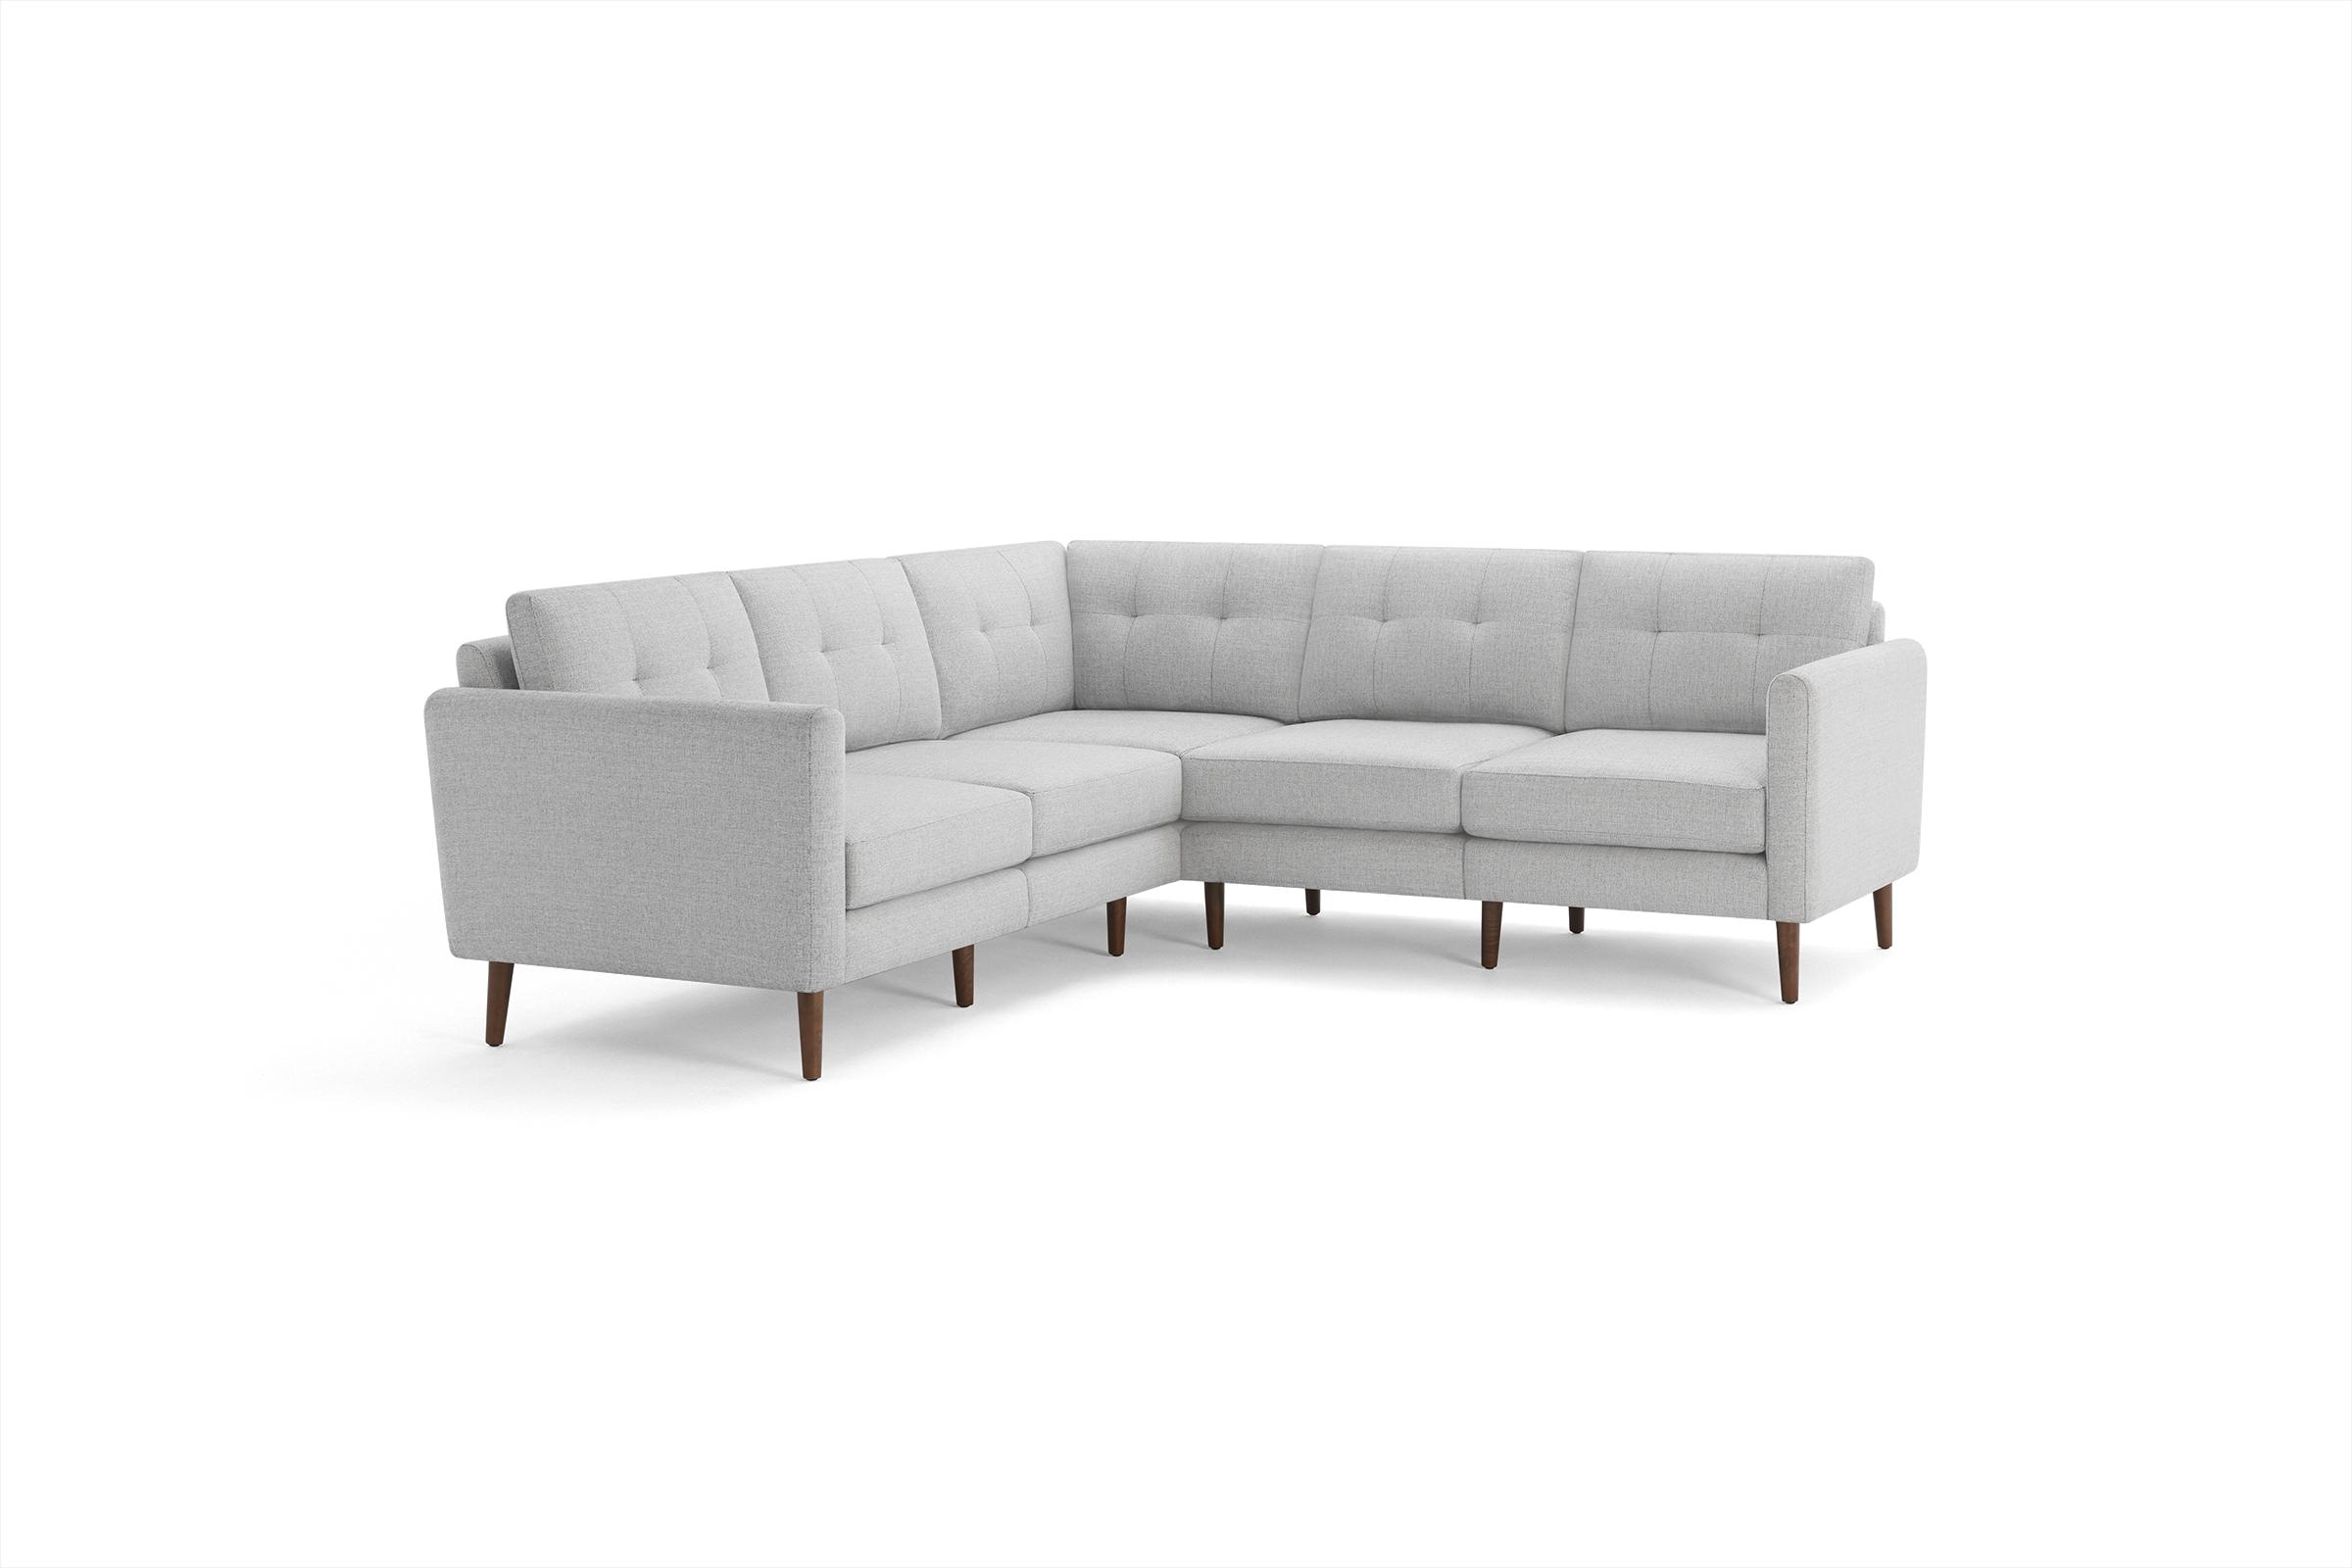 The Arch Nomad 5-Seat Corner Sectional in Crushed Gravel, Walnut Legs - Image 0